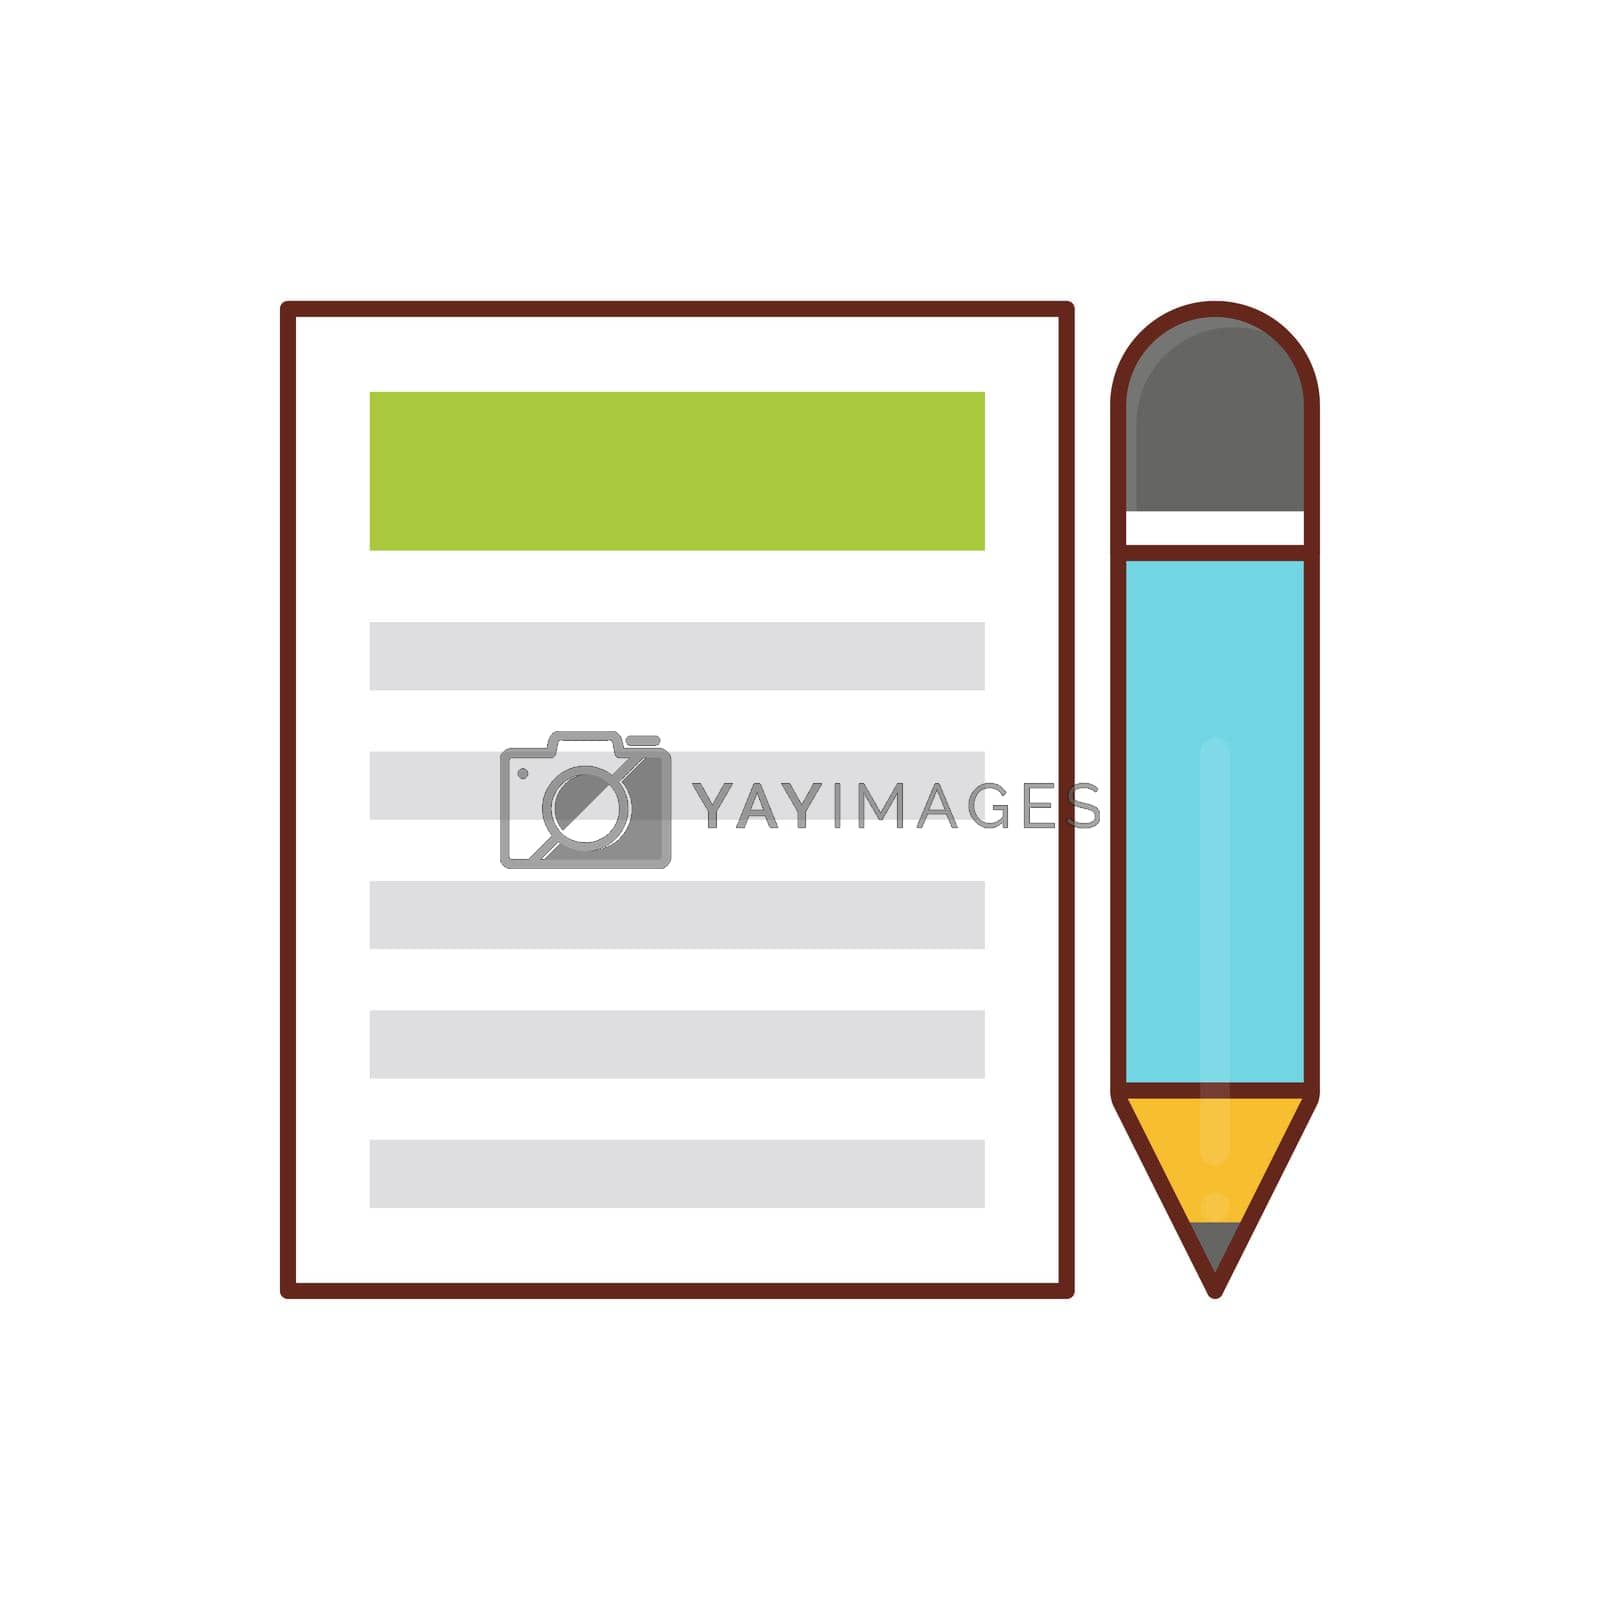 Royalty free image of write by FlaticonsDesign